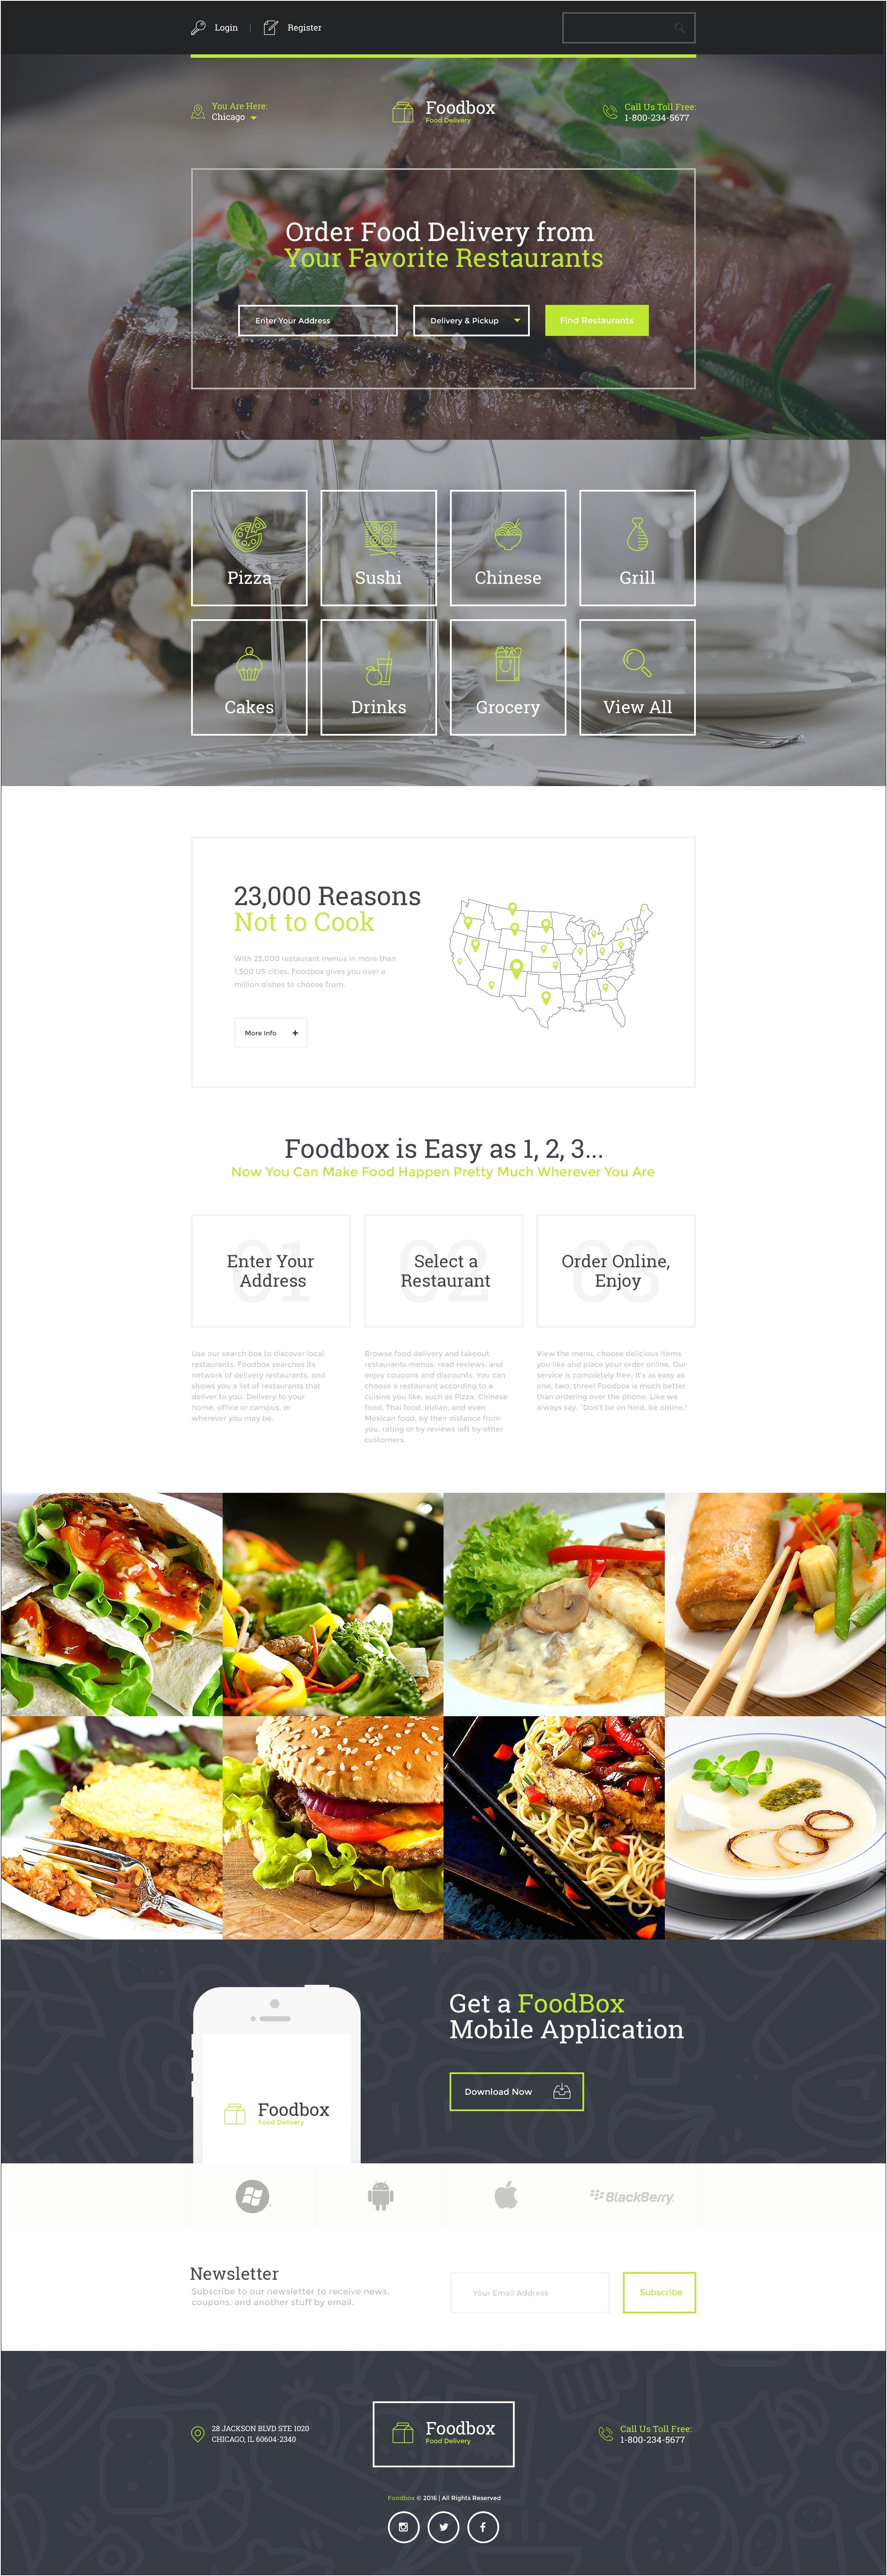 bootstrap-template-free-download-for-restaurant-resume-gallery